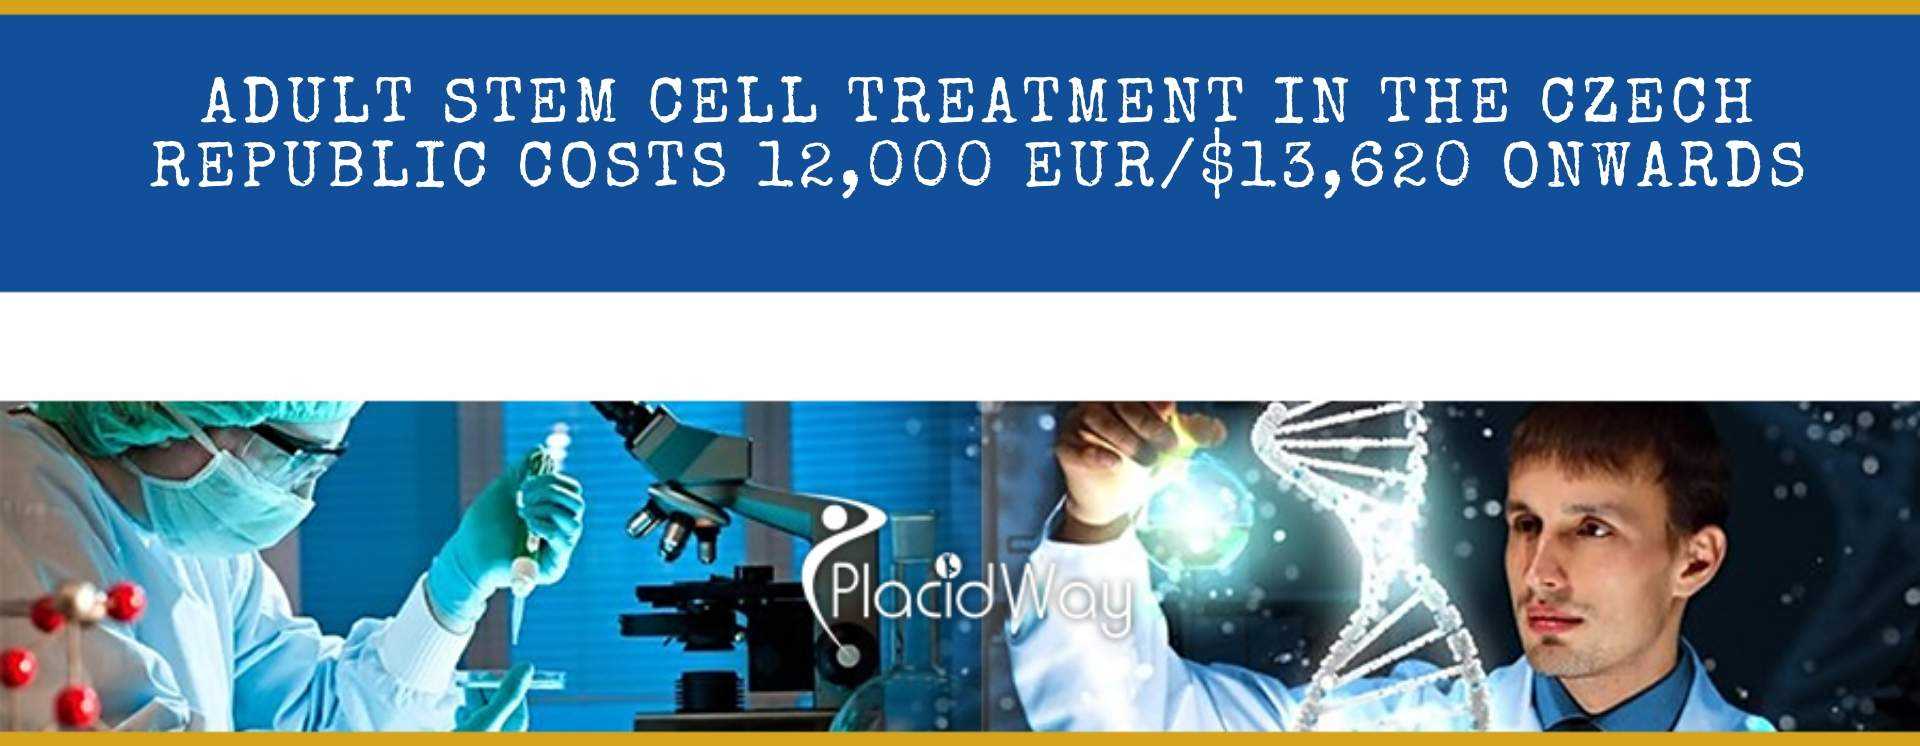 Adult Stem Cell Treatment in the Czech Republic